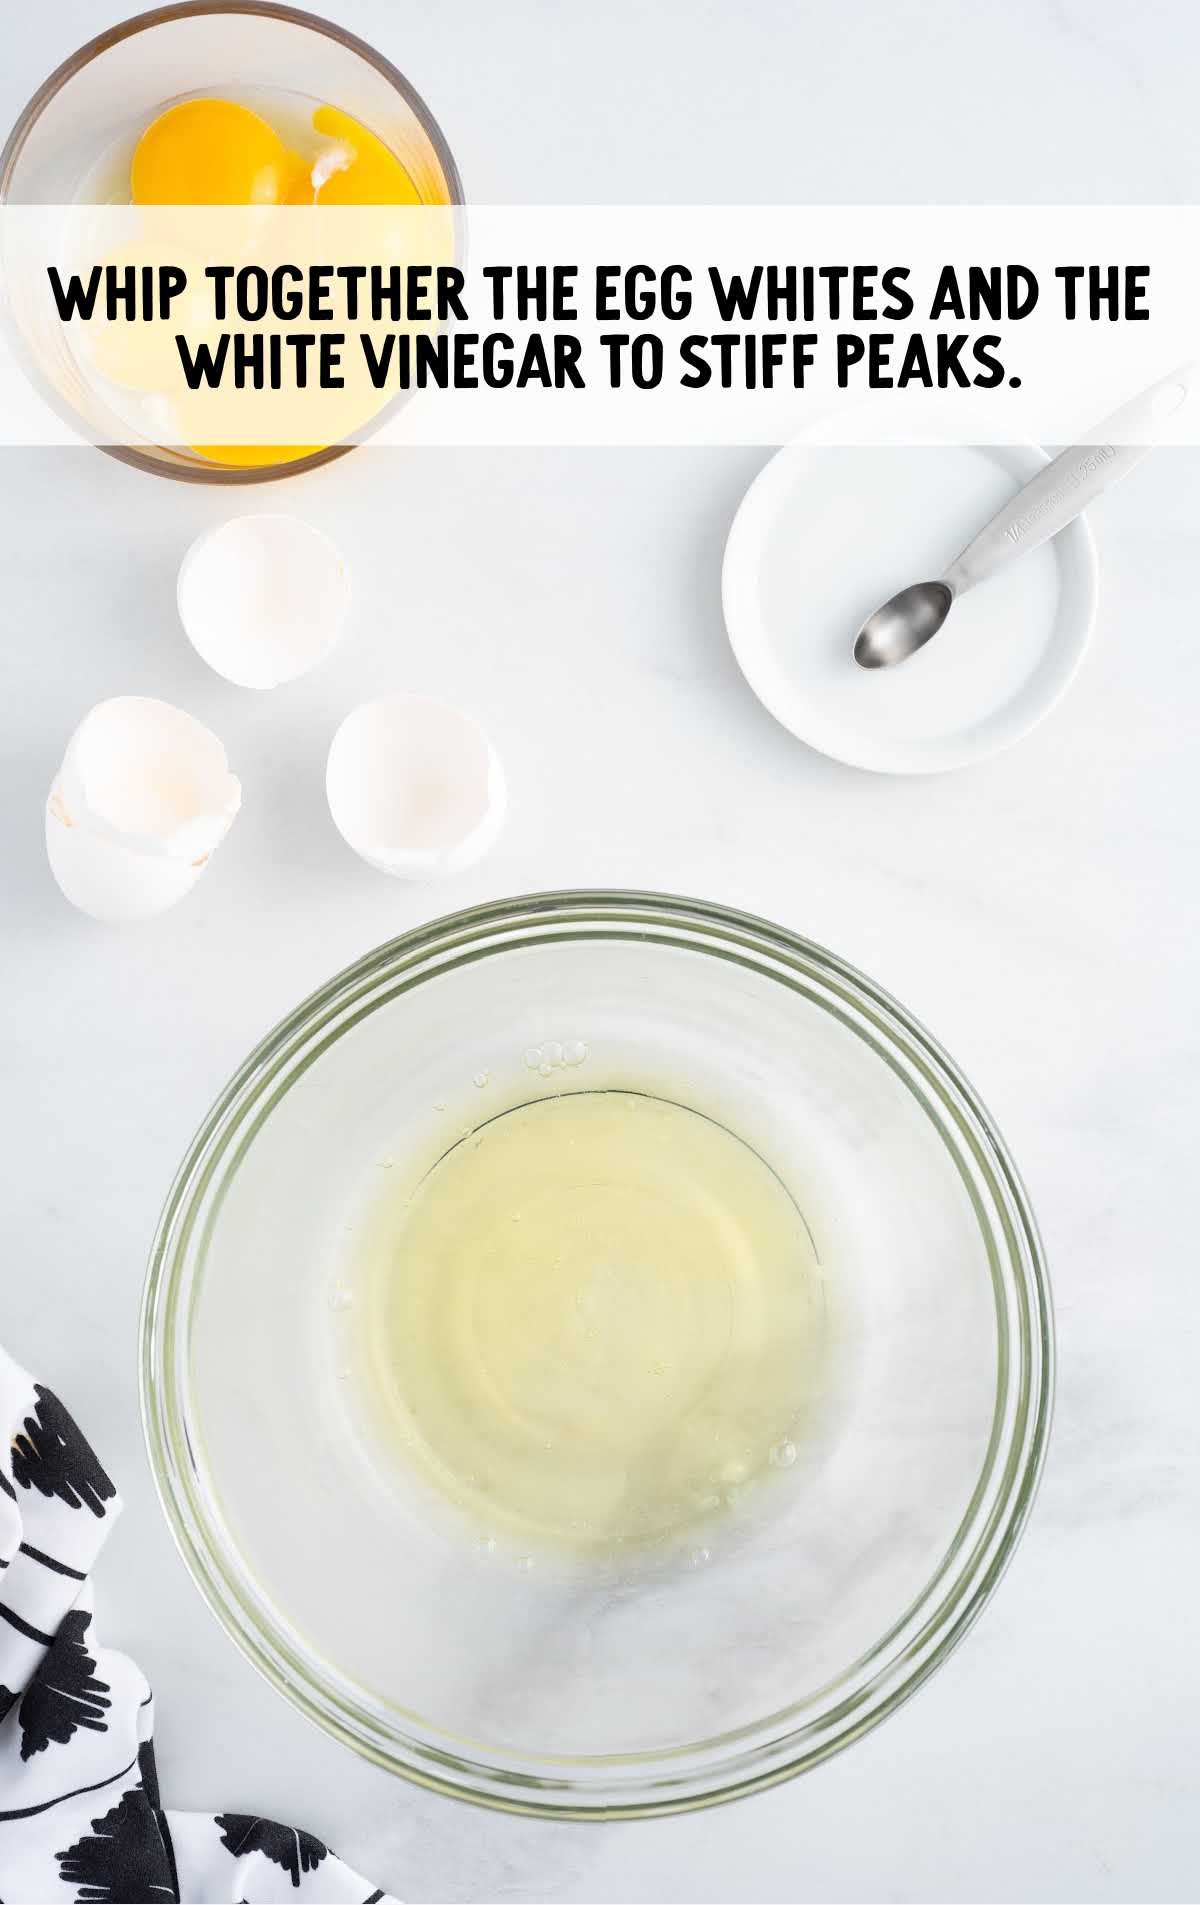 egg white and vinegar in a bowl